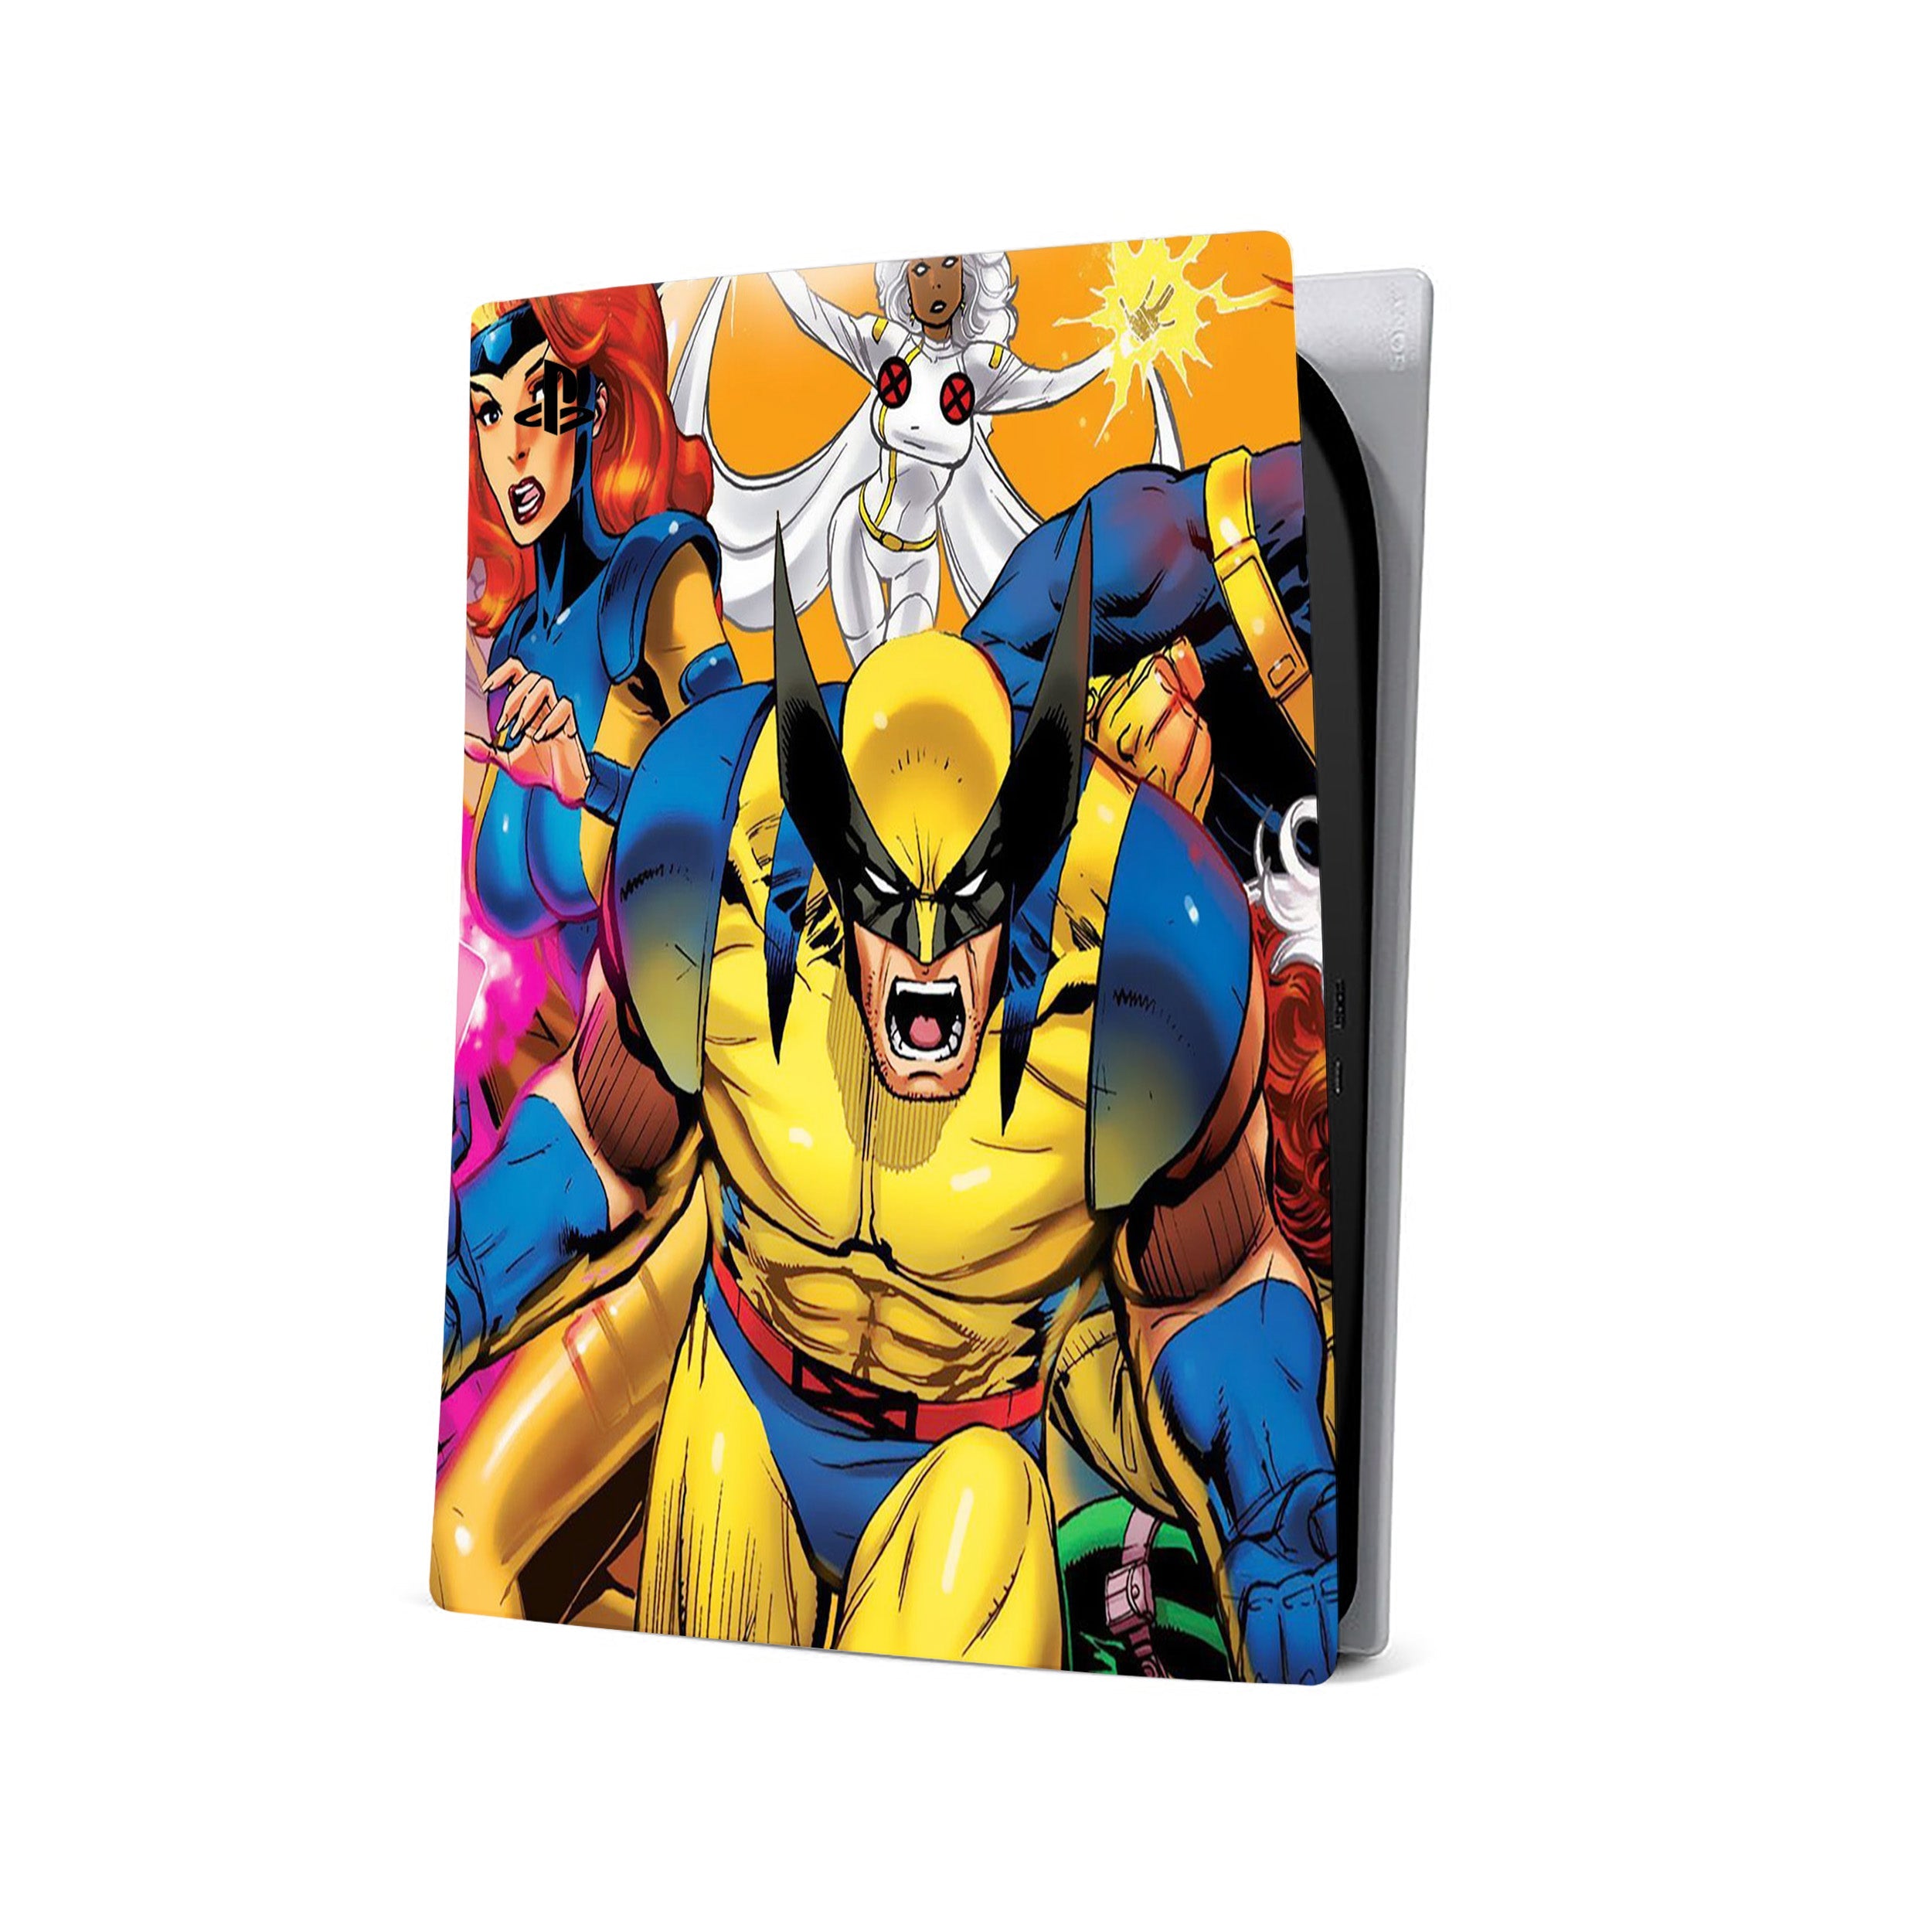 A video game skin featuring a Marvel X Men design for the PS5.